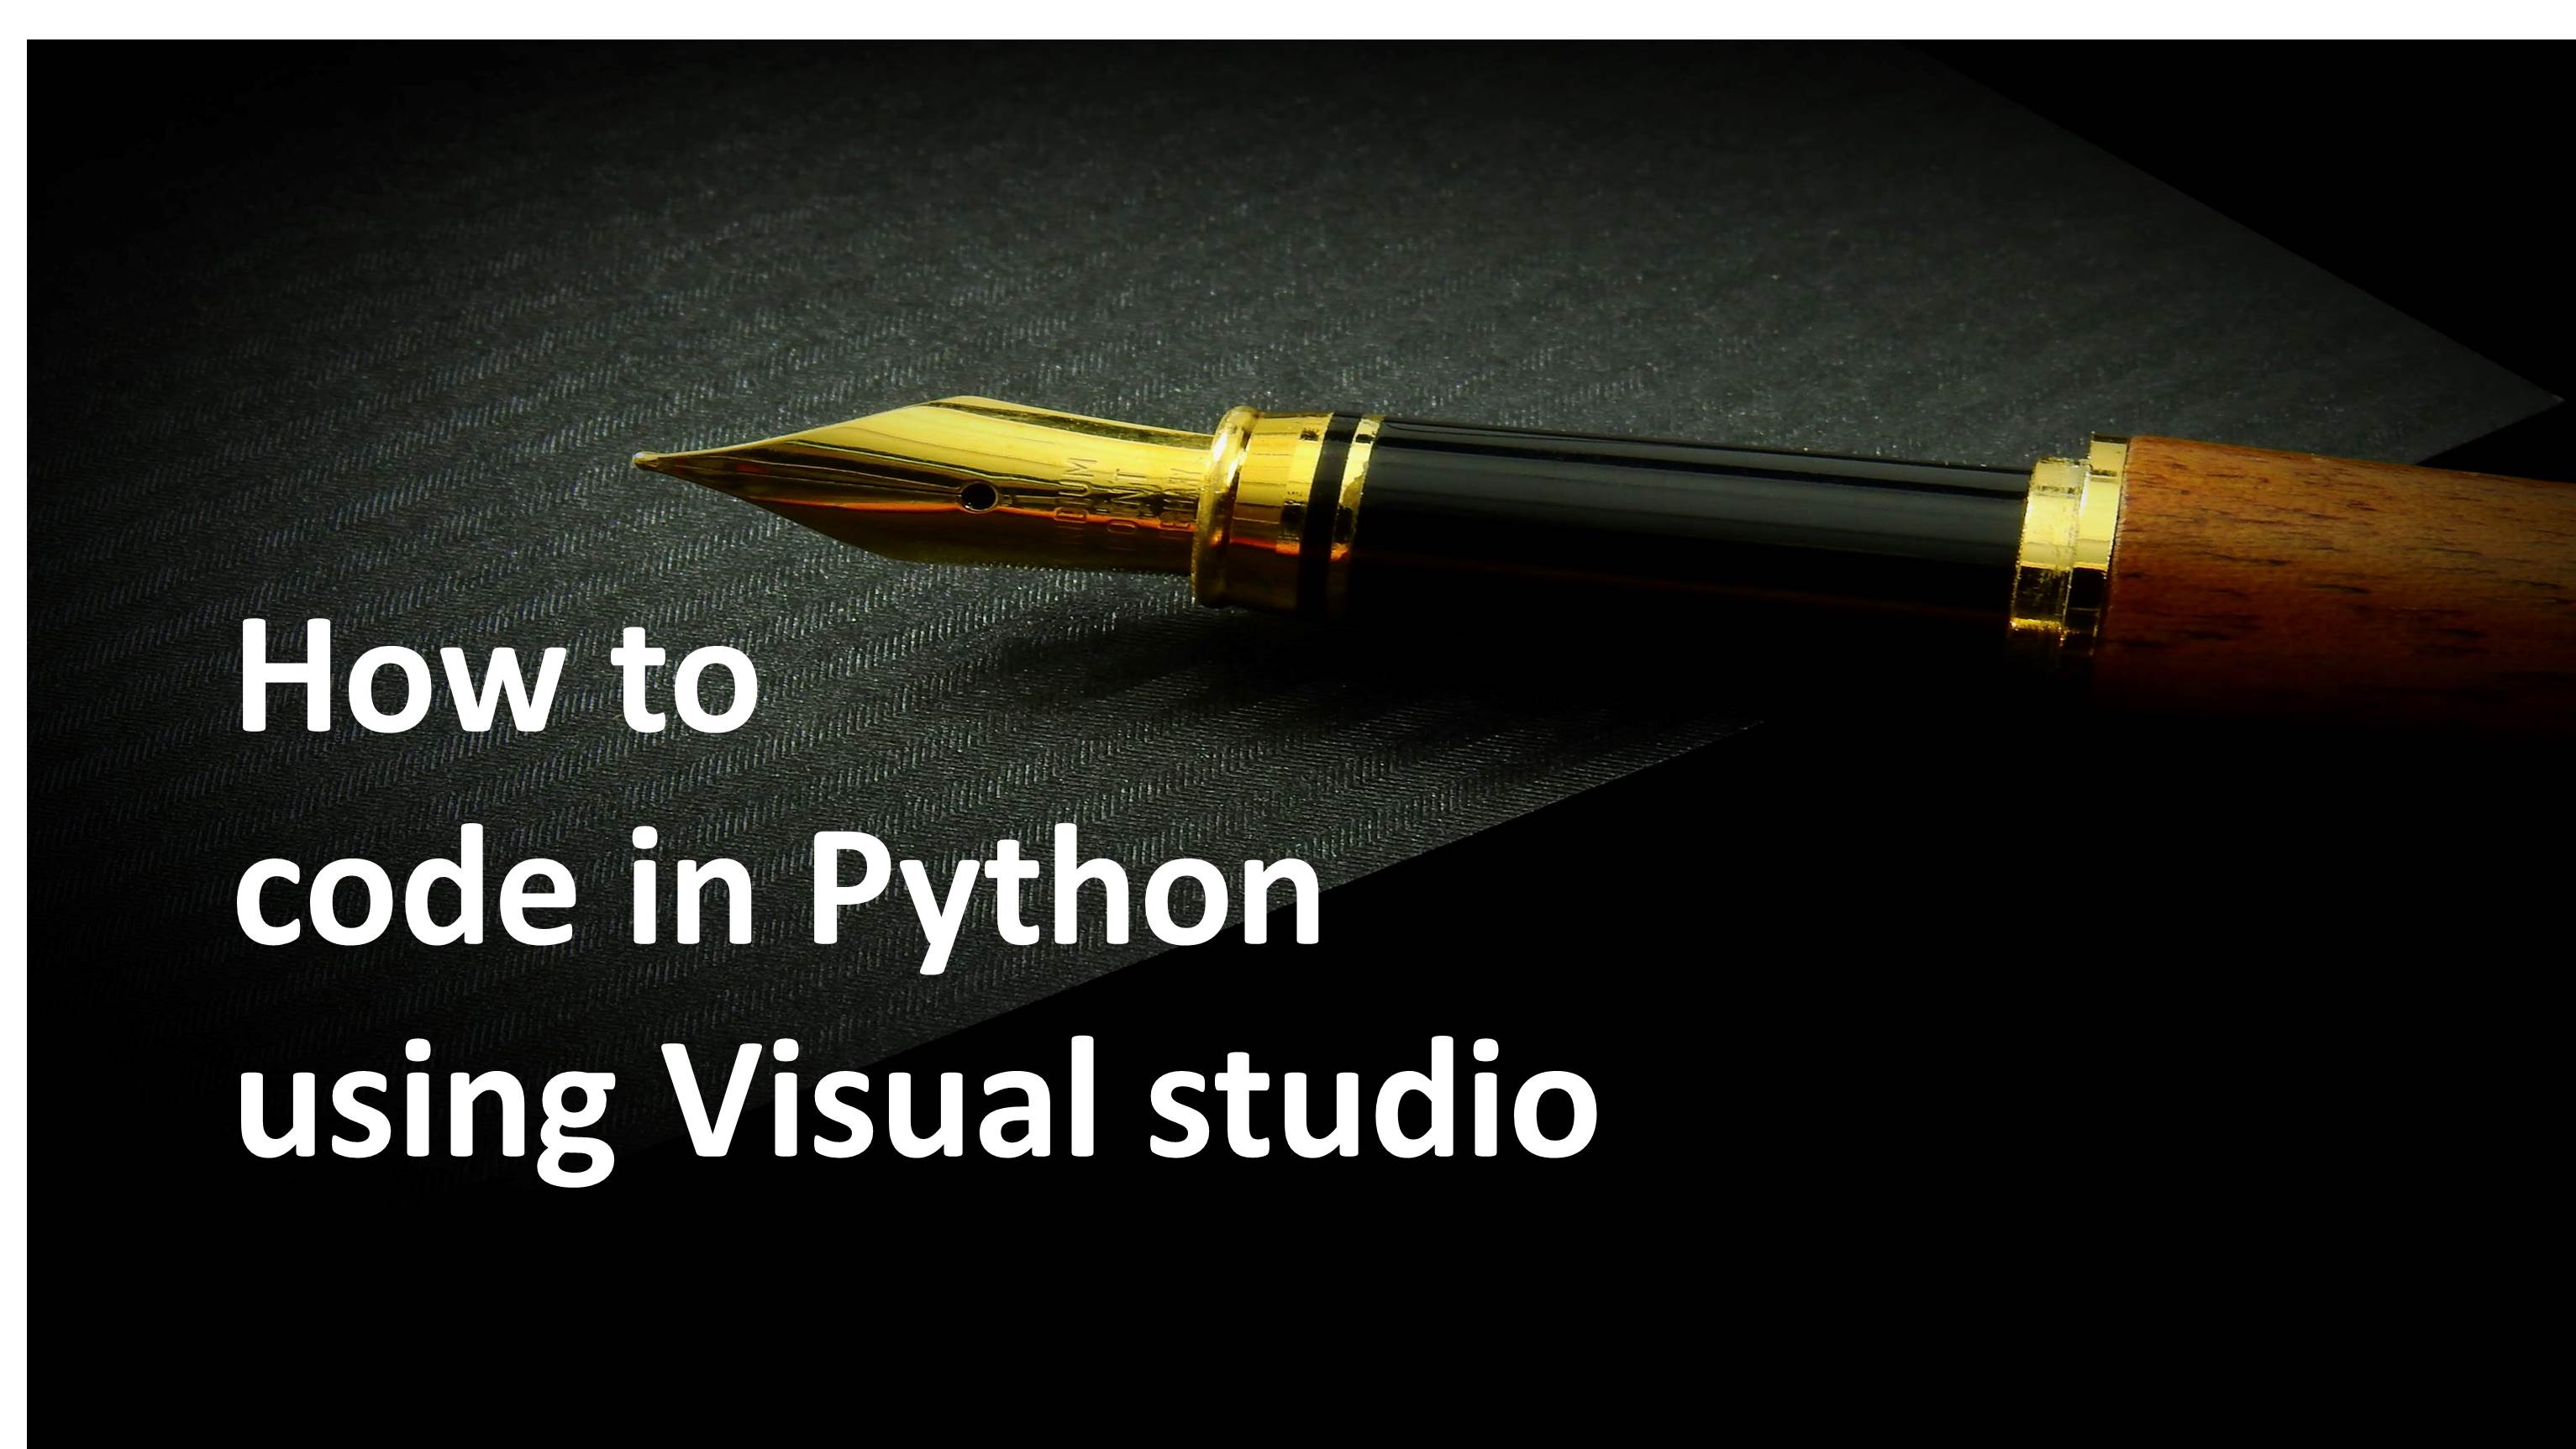 How to code in Python using Visual studio